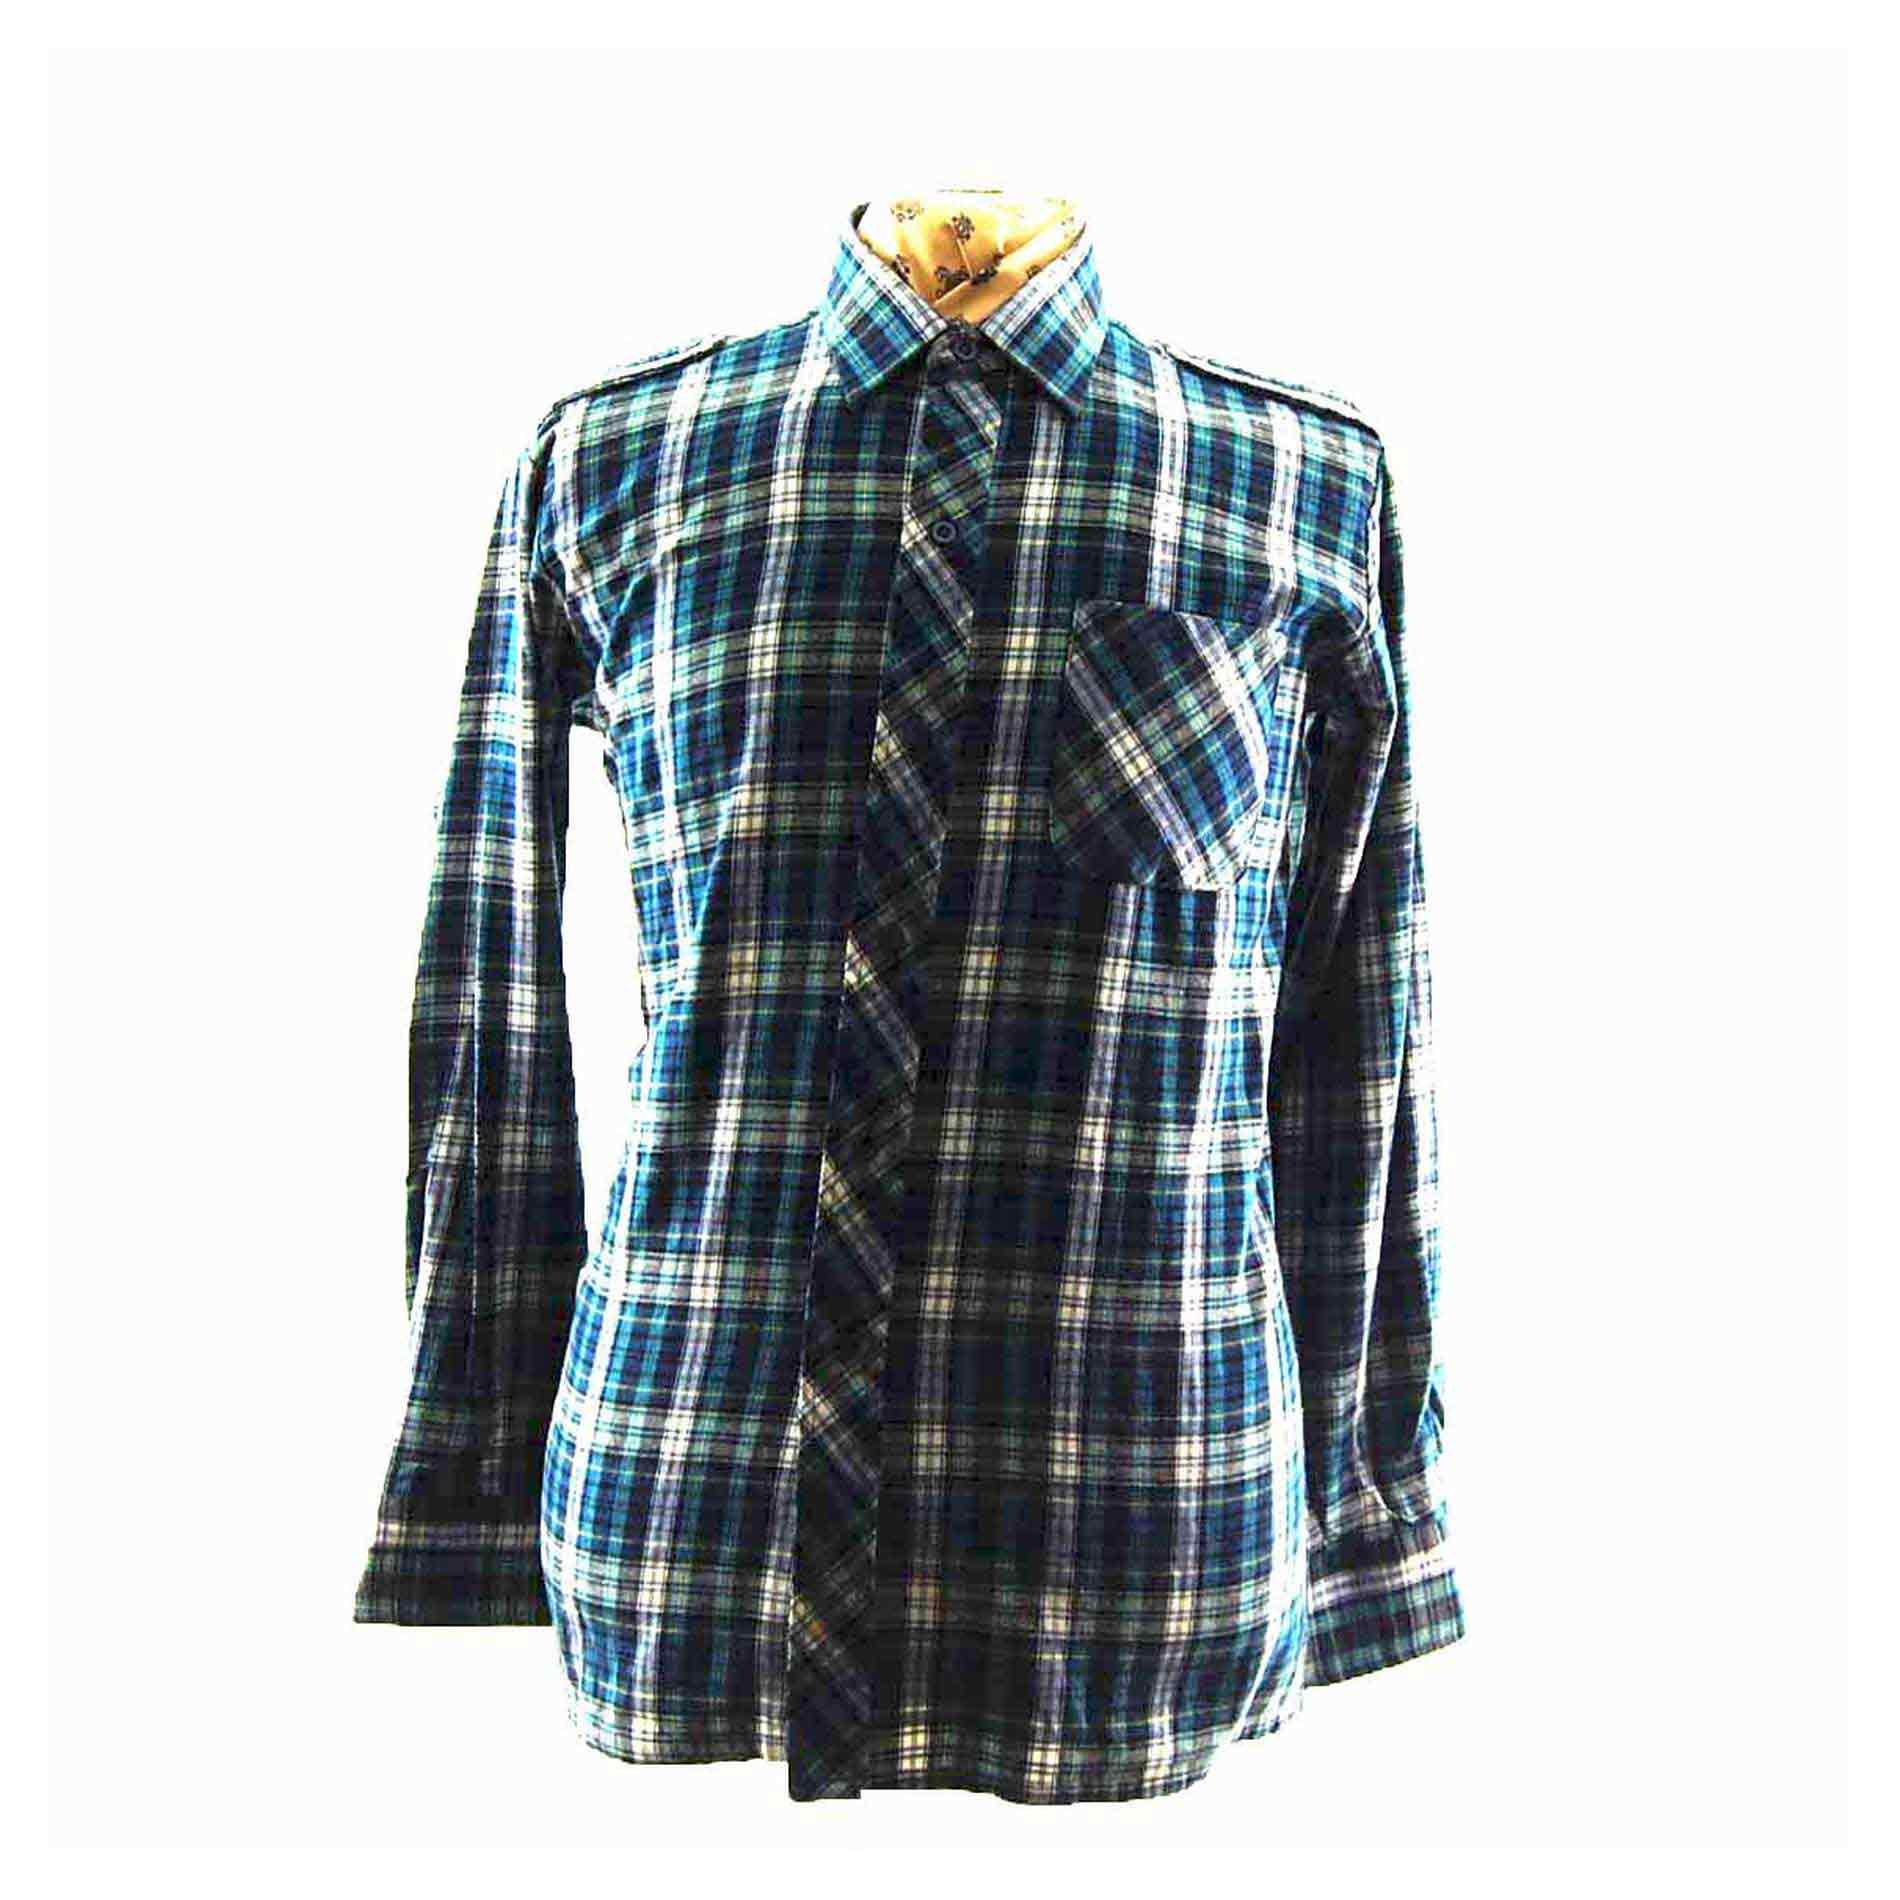 Plaid Flannel Shirt With Epaulets - Blue 17 Vintage Clothing